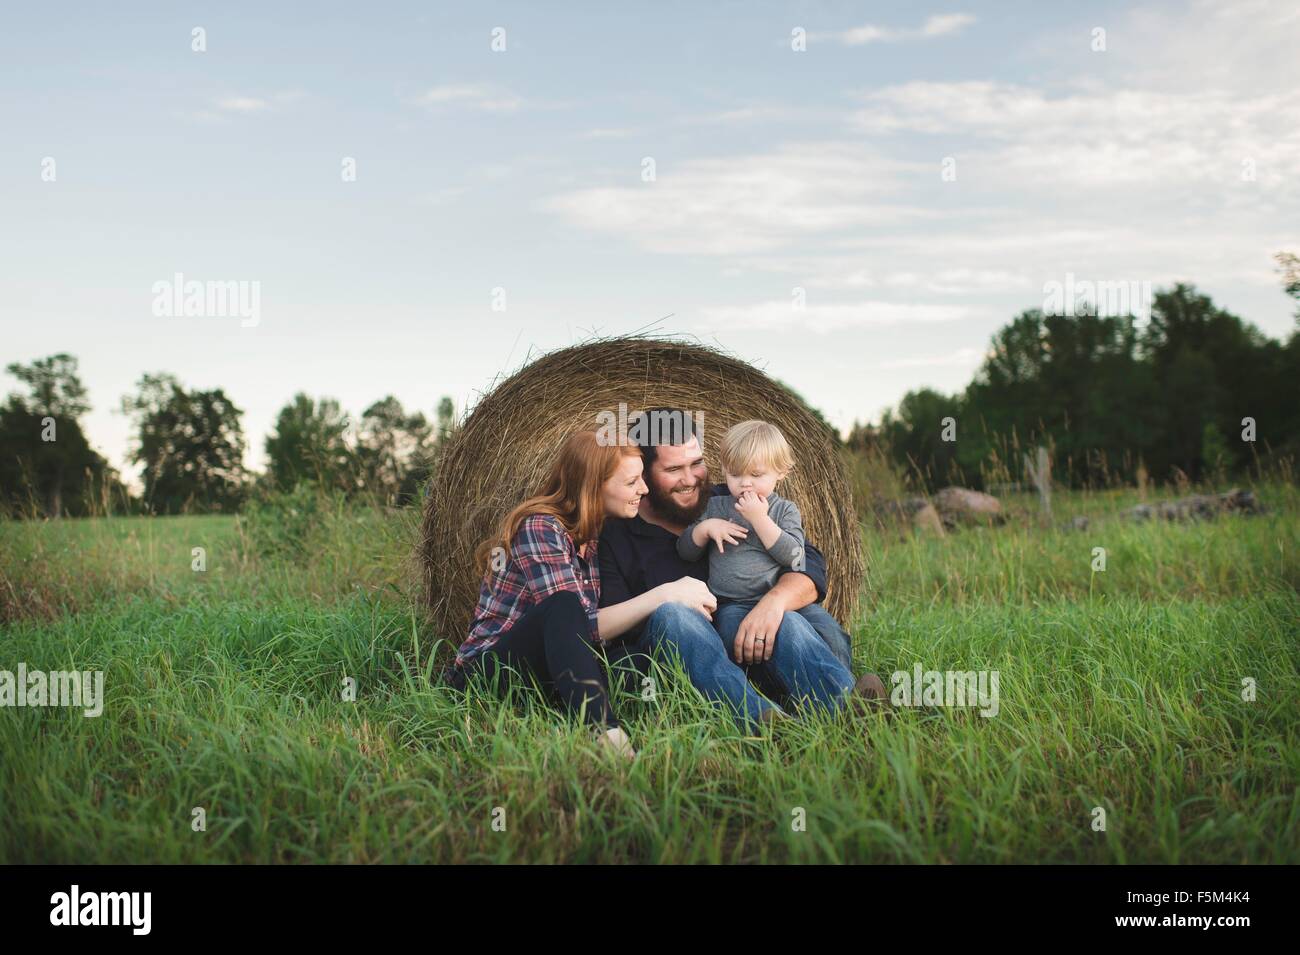 Portrait of young family in field Stock Photo